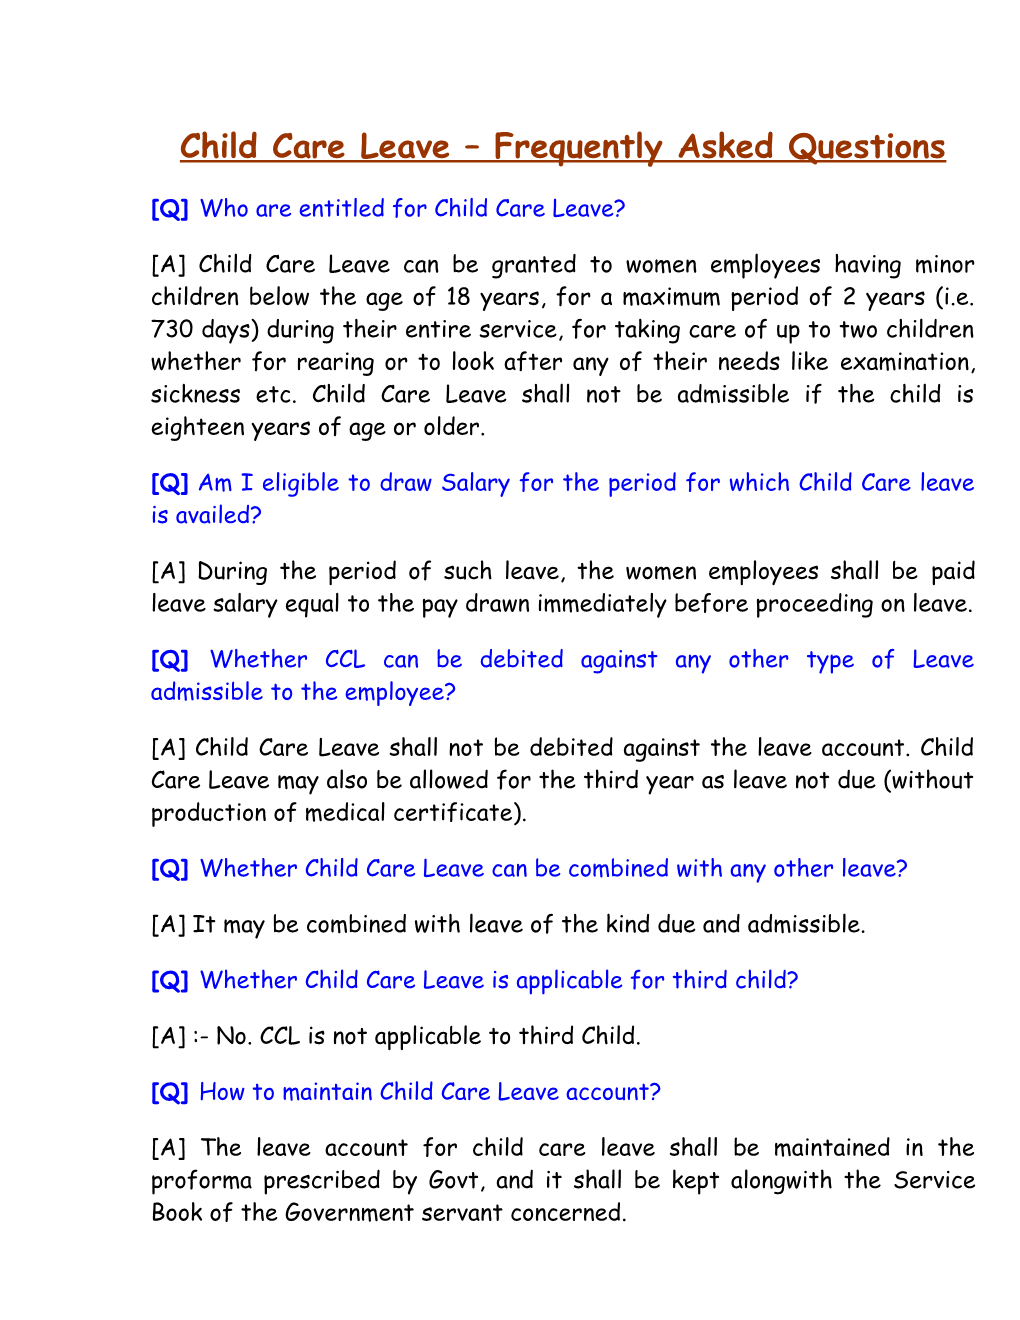 Child Care Leave Frequently Asked Questions